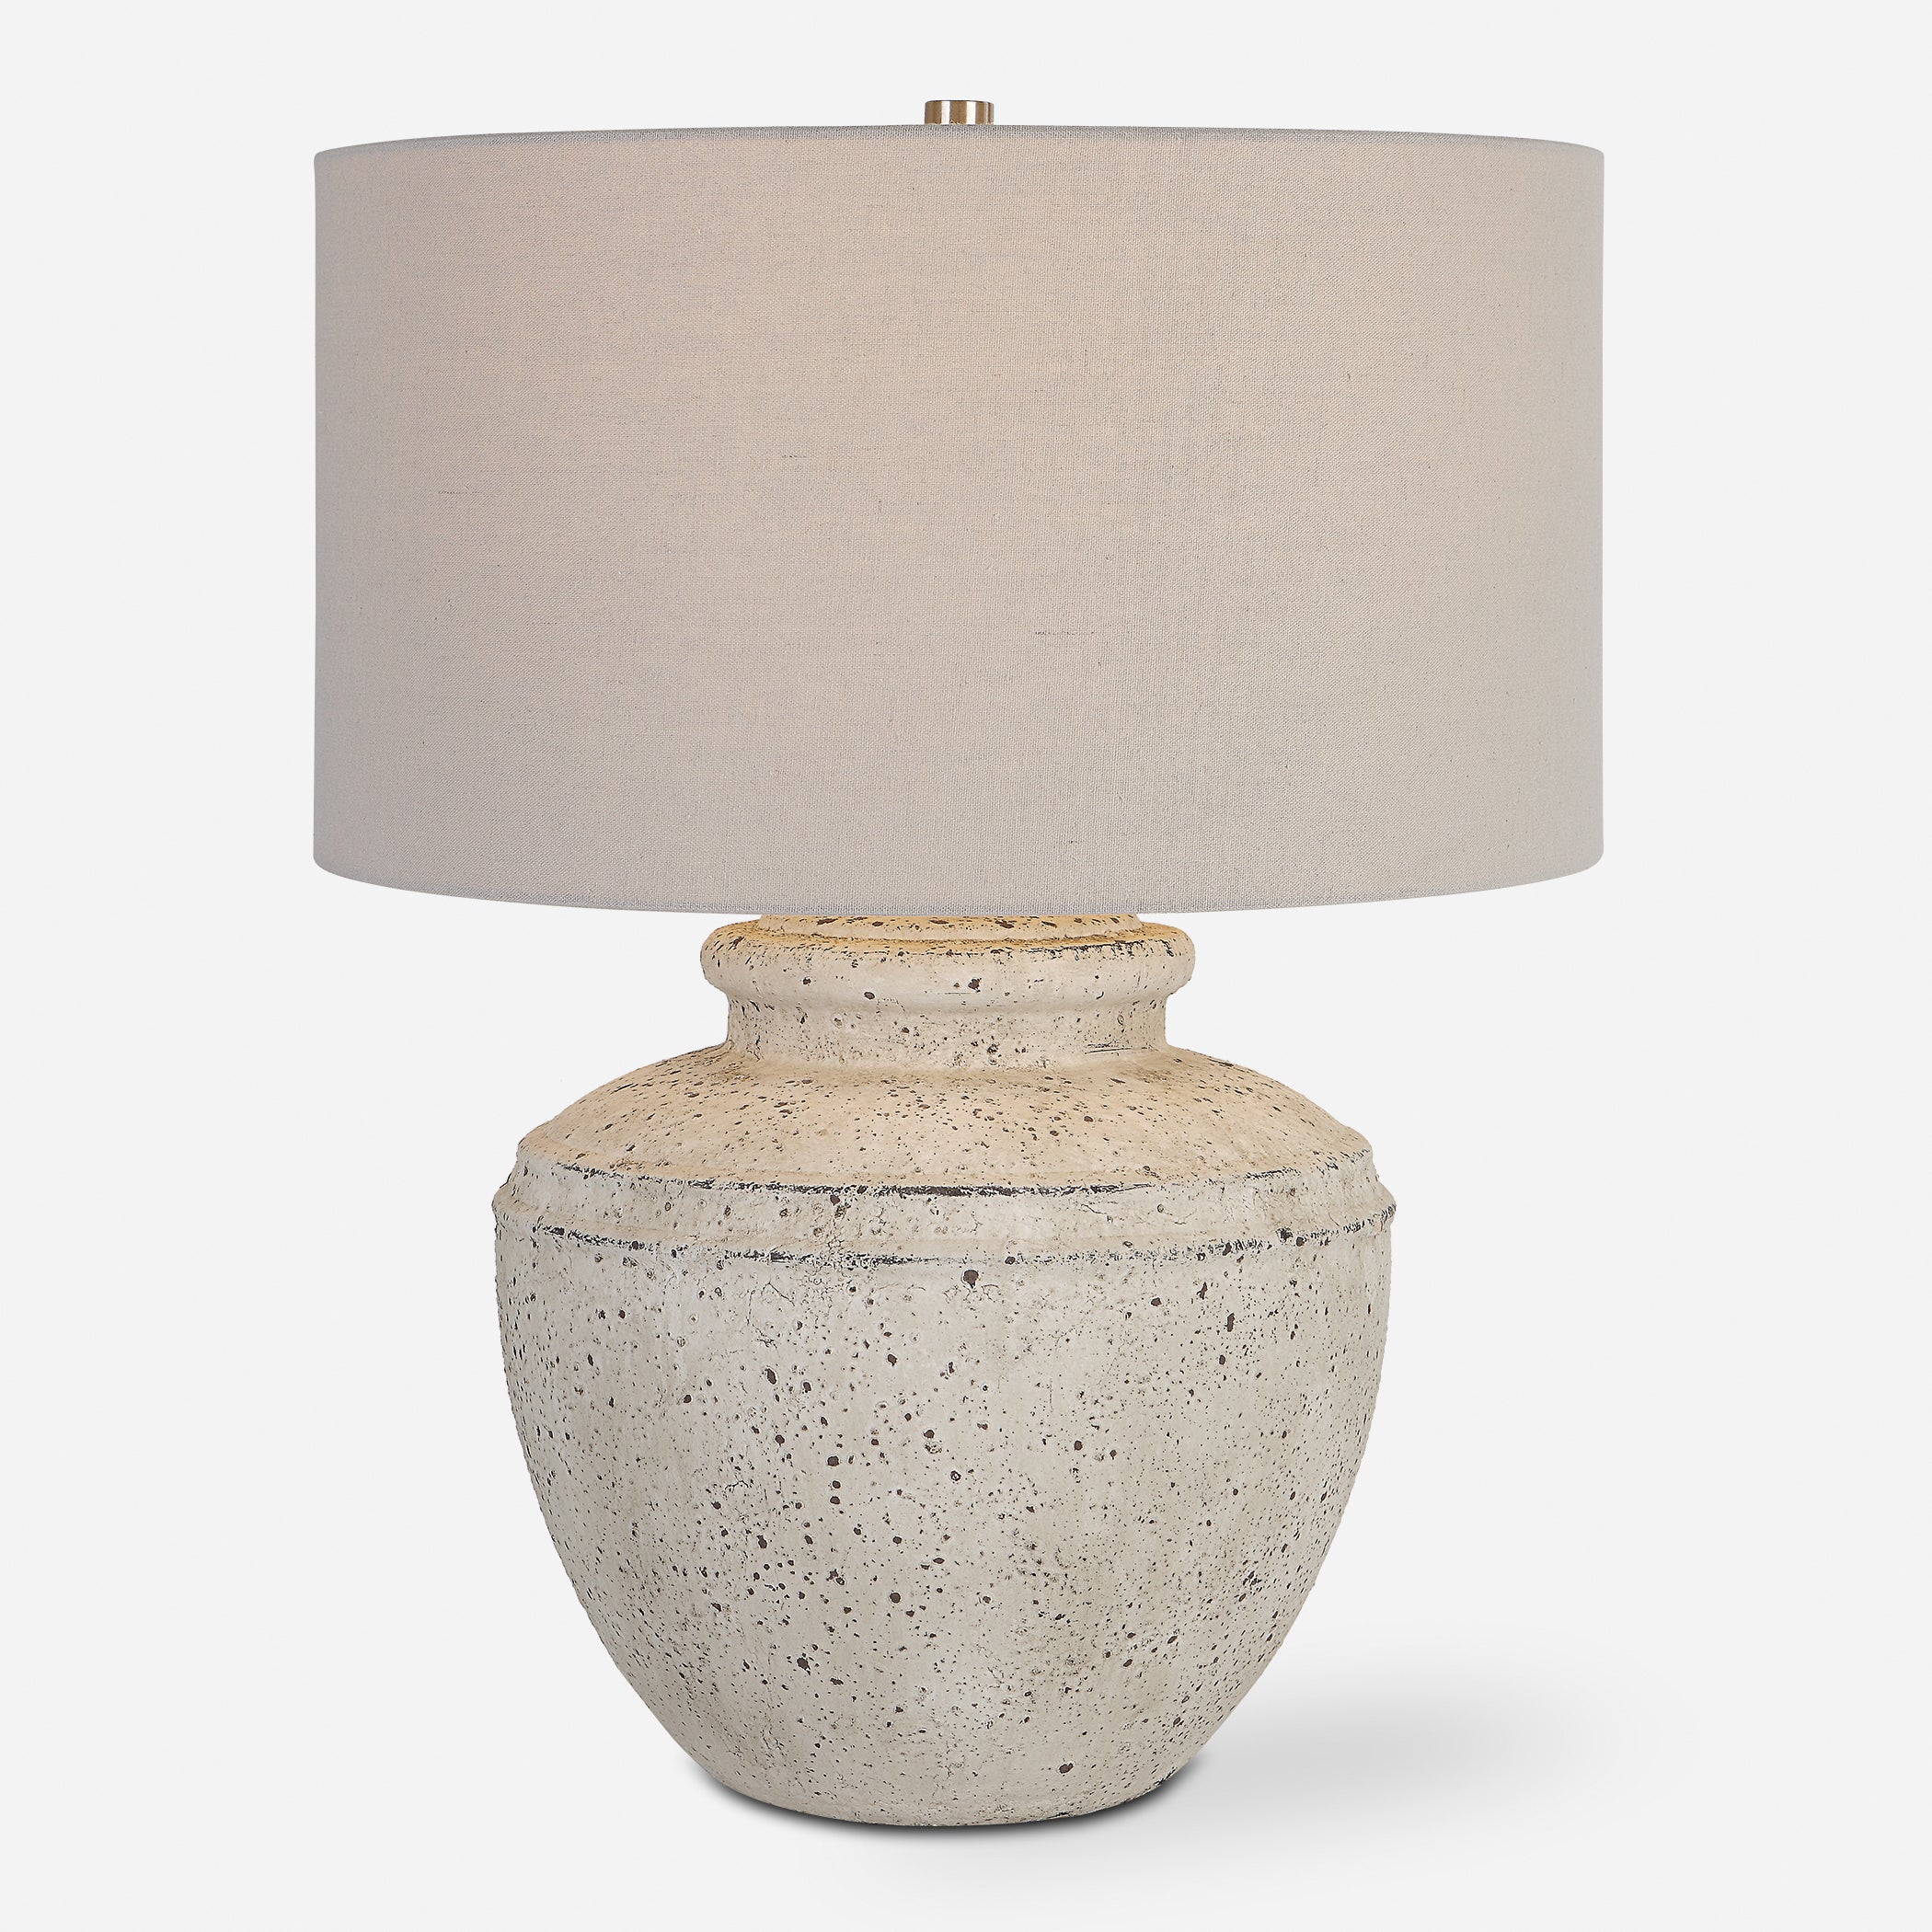 Uttermost Artifact Aged Stone Table Lamp Aged Stone Table Lamp Uttermost   